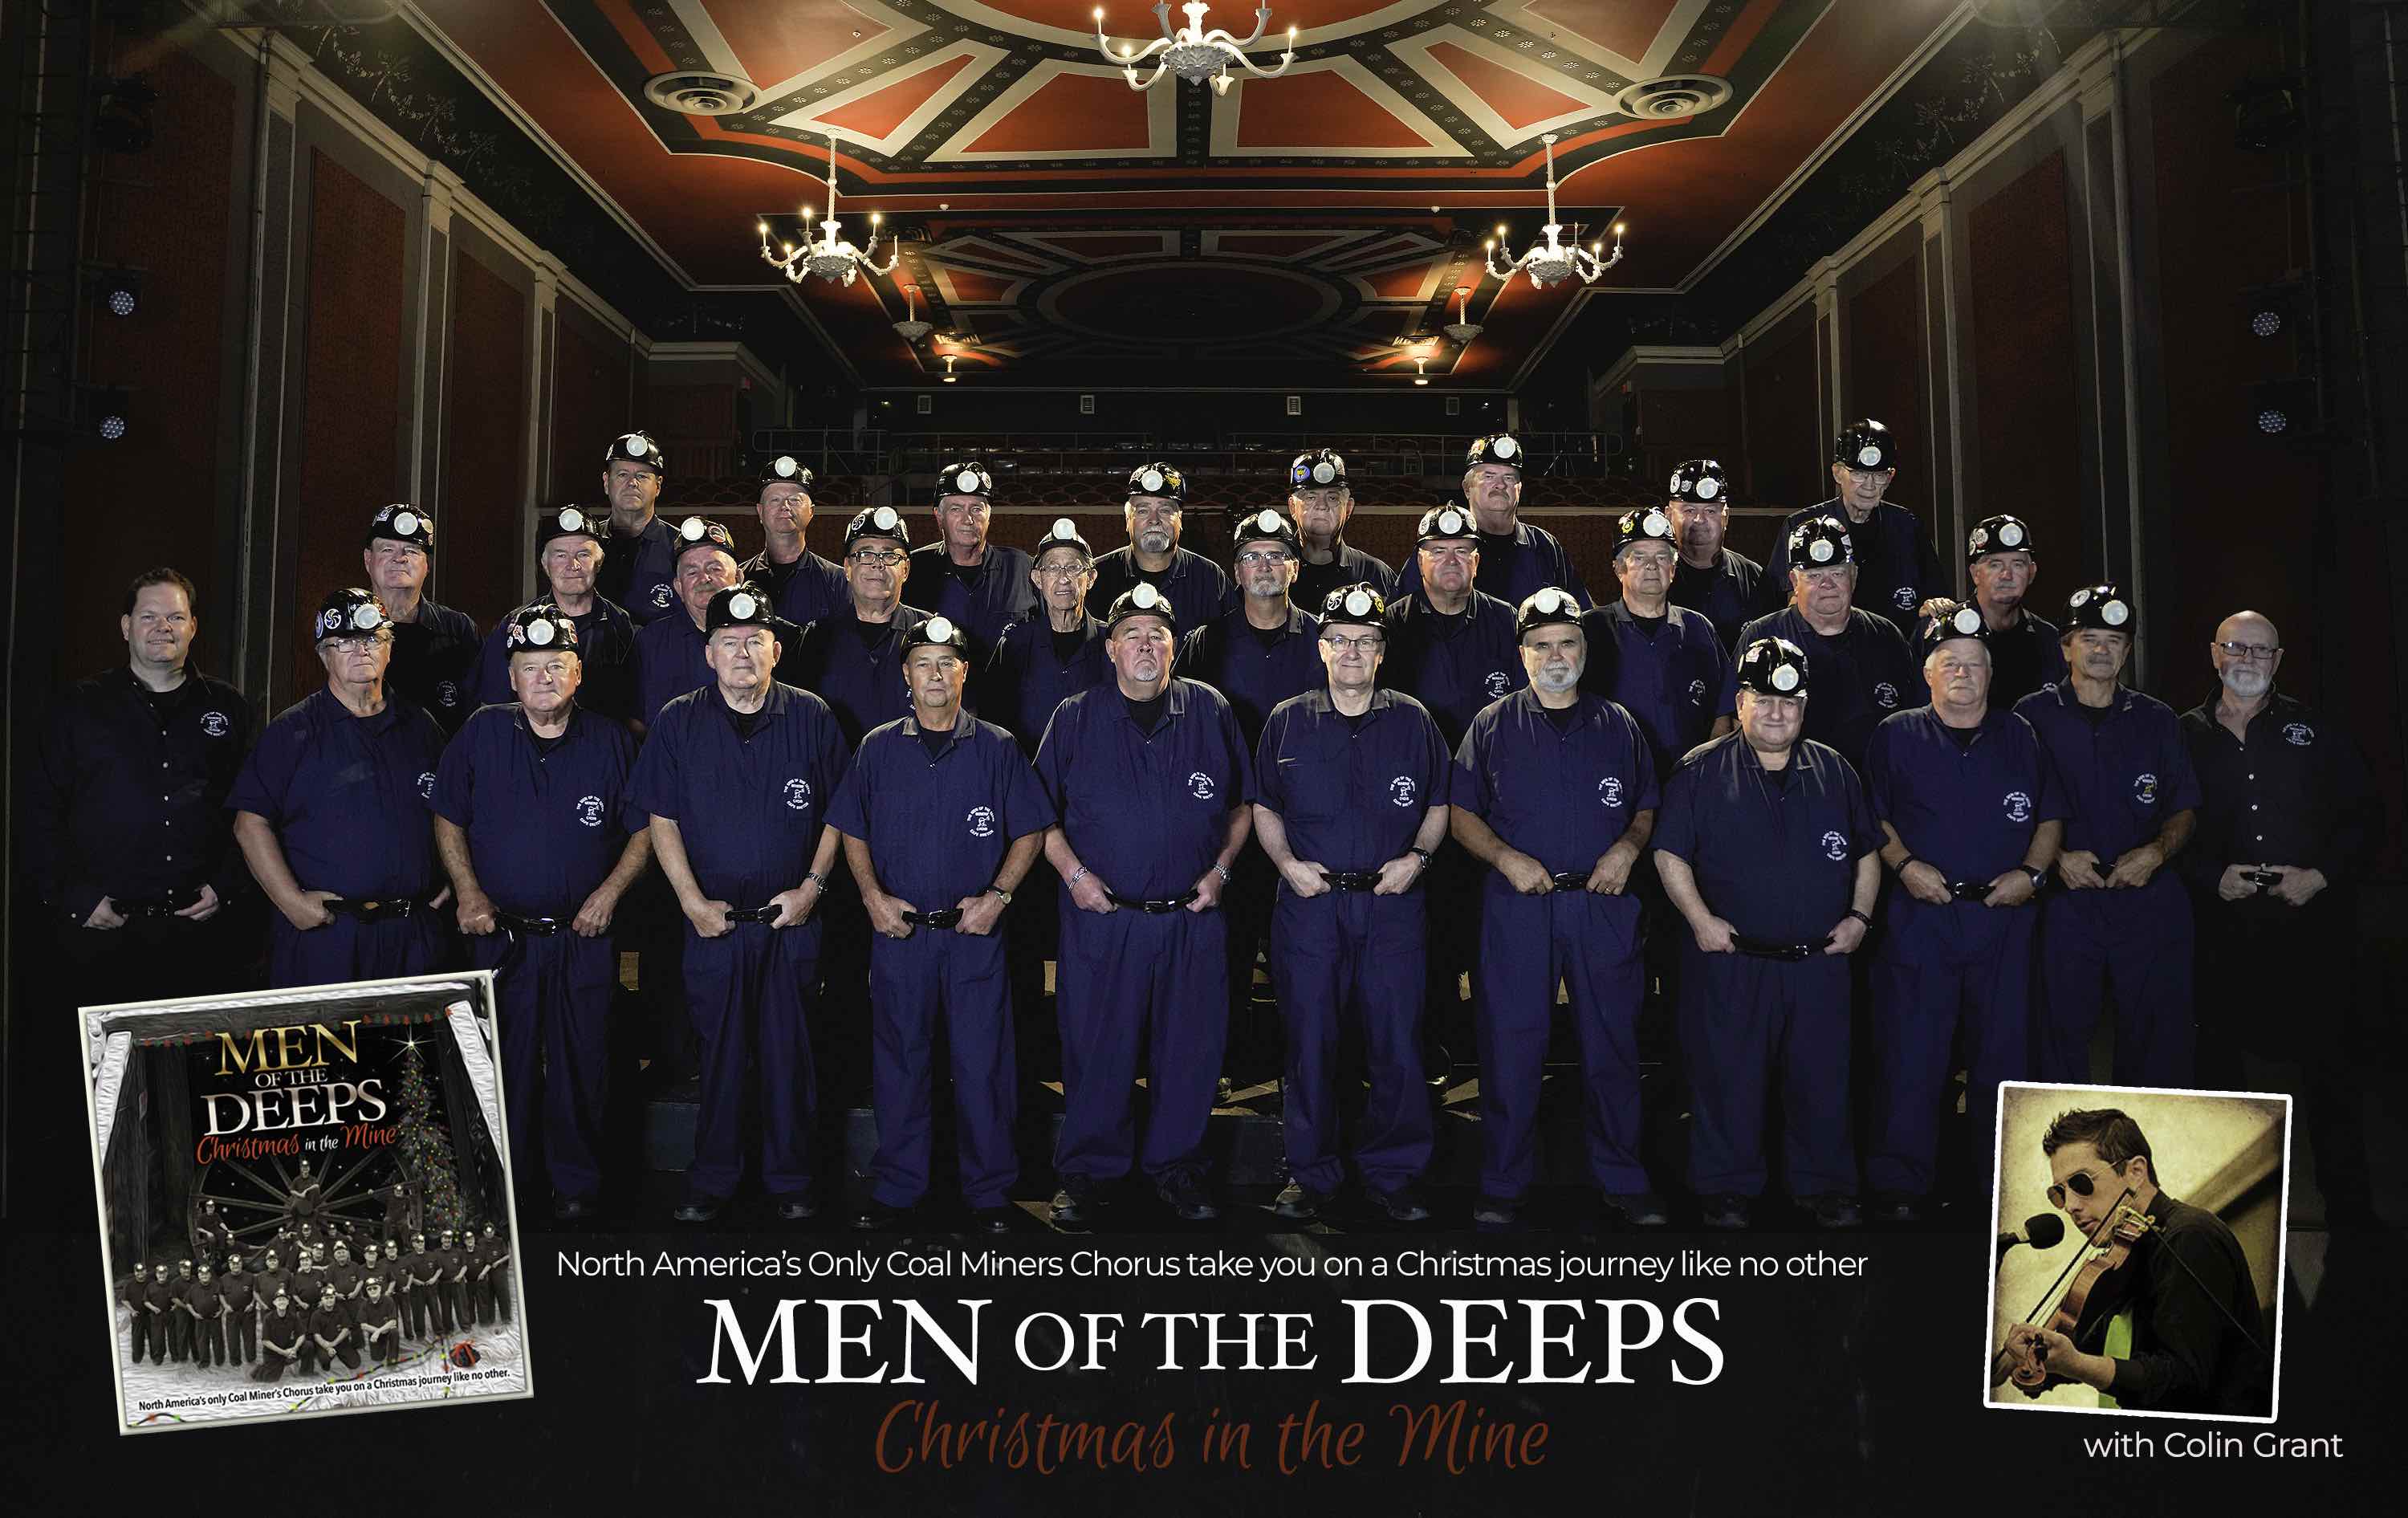 The Men of the Deeps: Christmas in the Mine